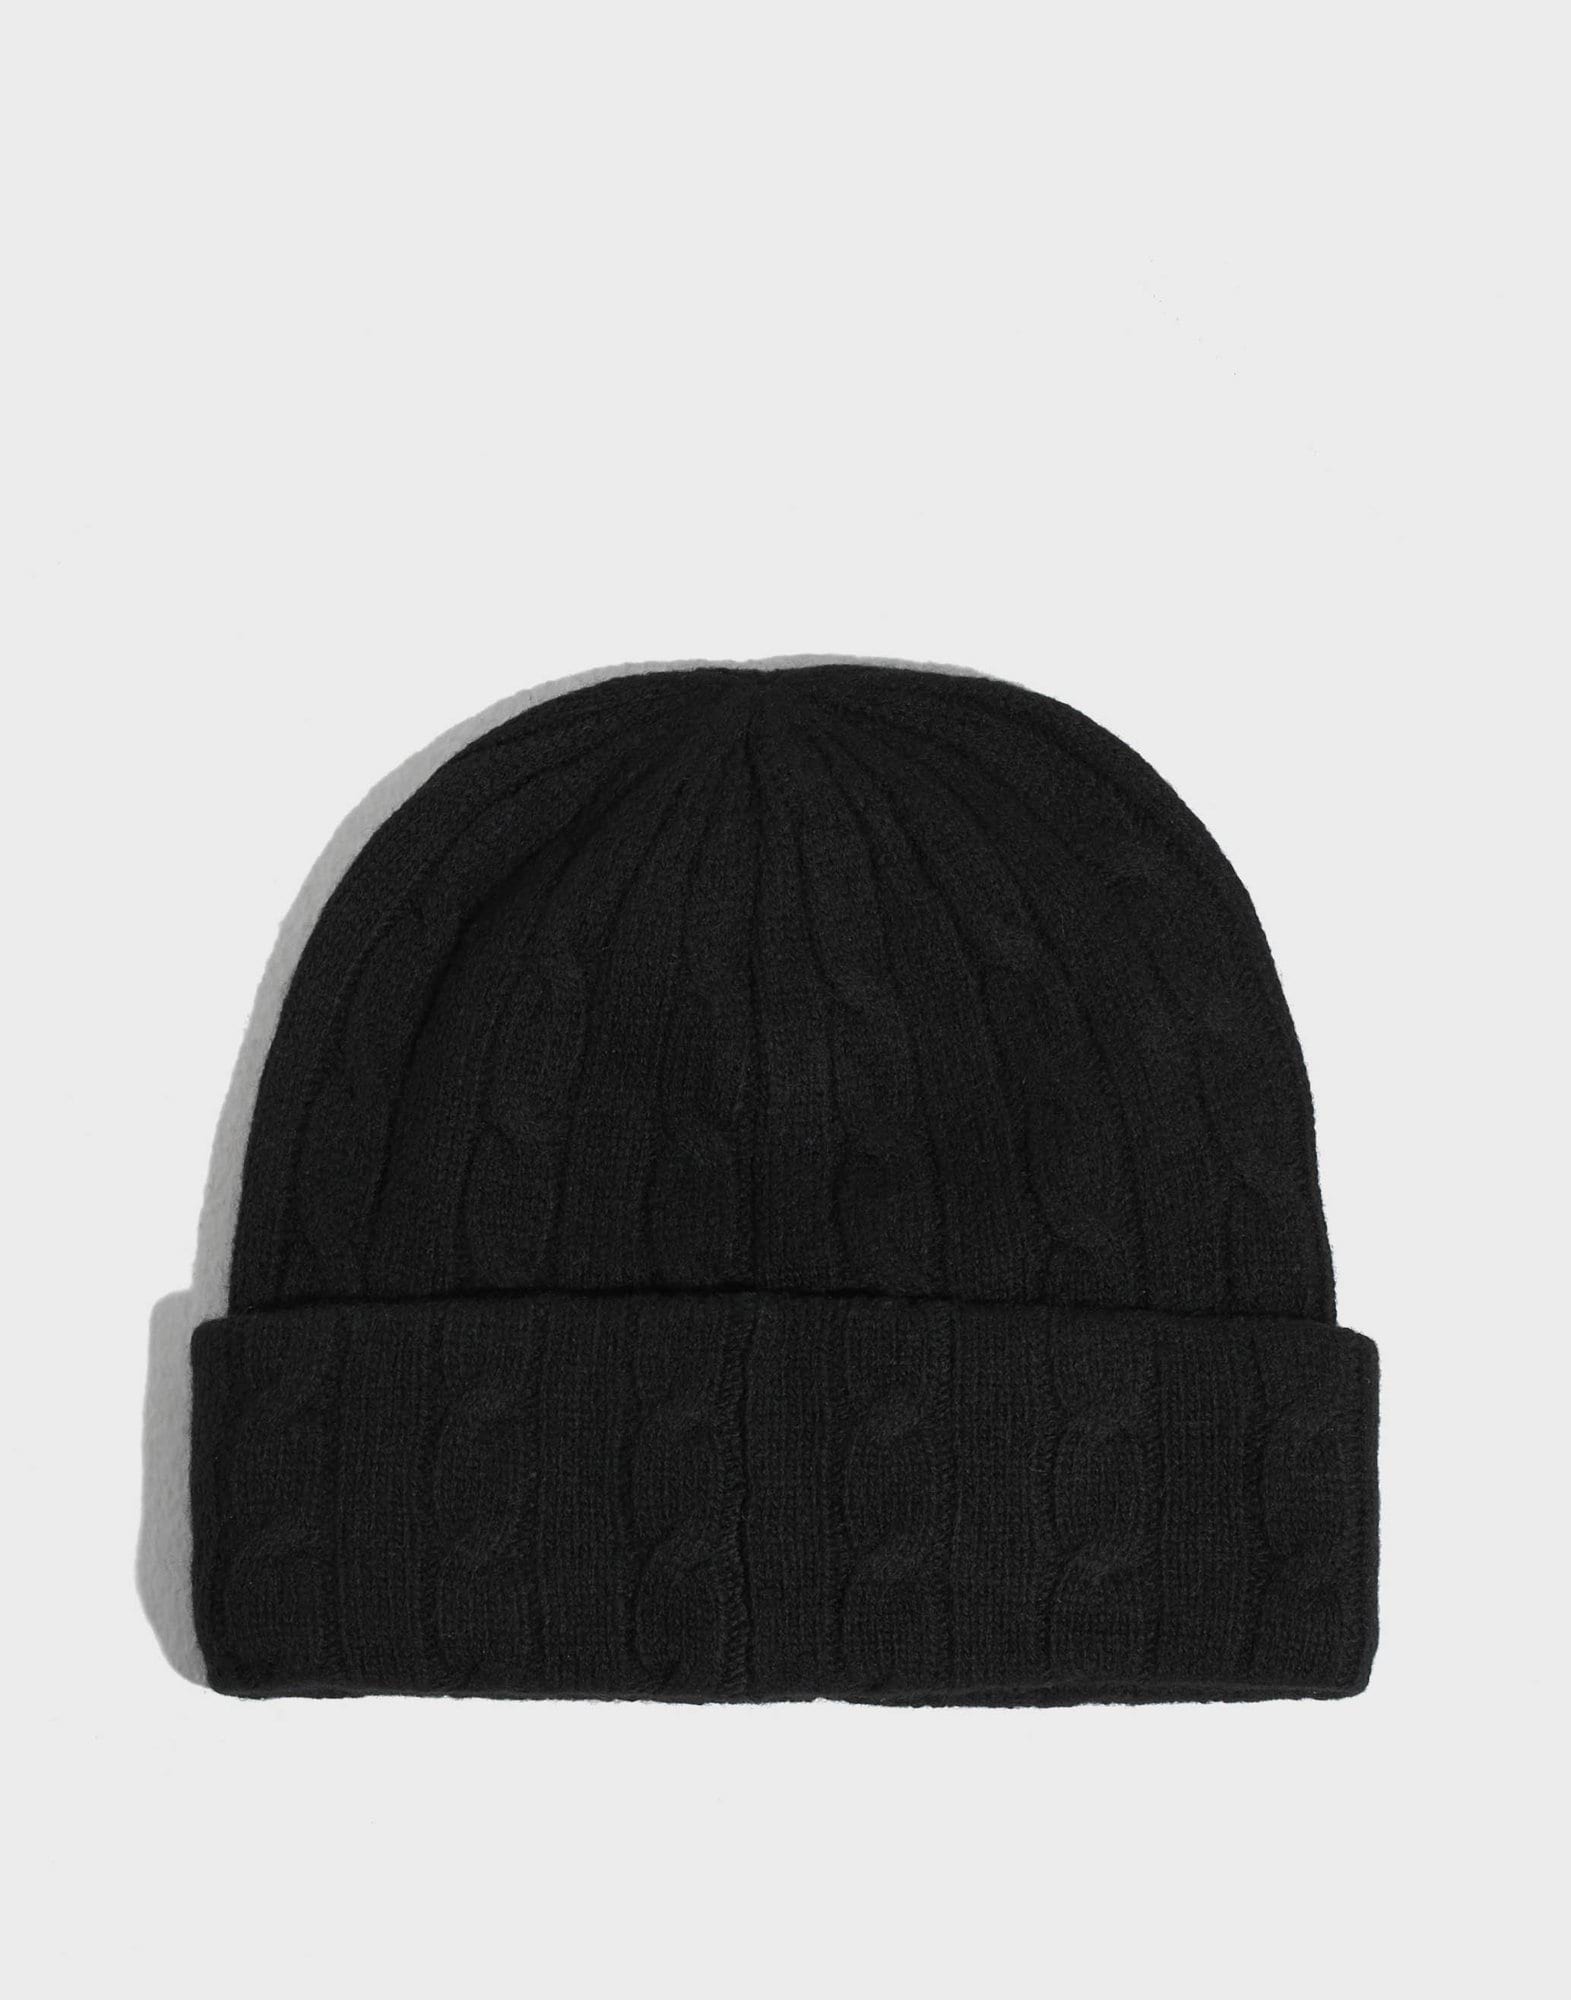 CUFF HAT-HAT-COLD WEATHER